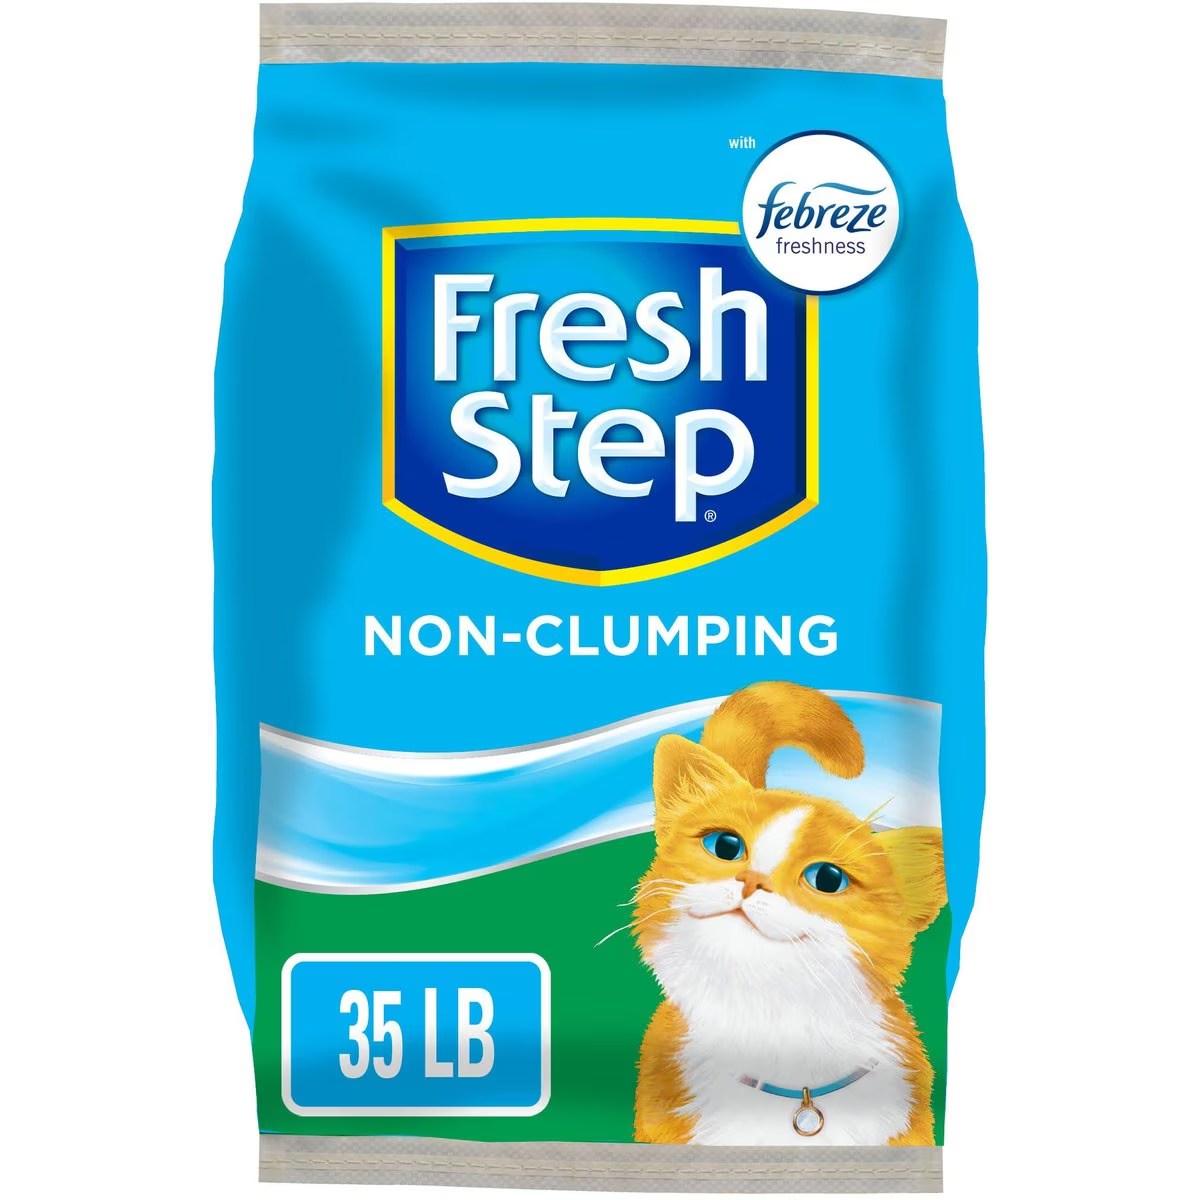 Fresh Step Premium Scented Non-Clumping Cat Litter New